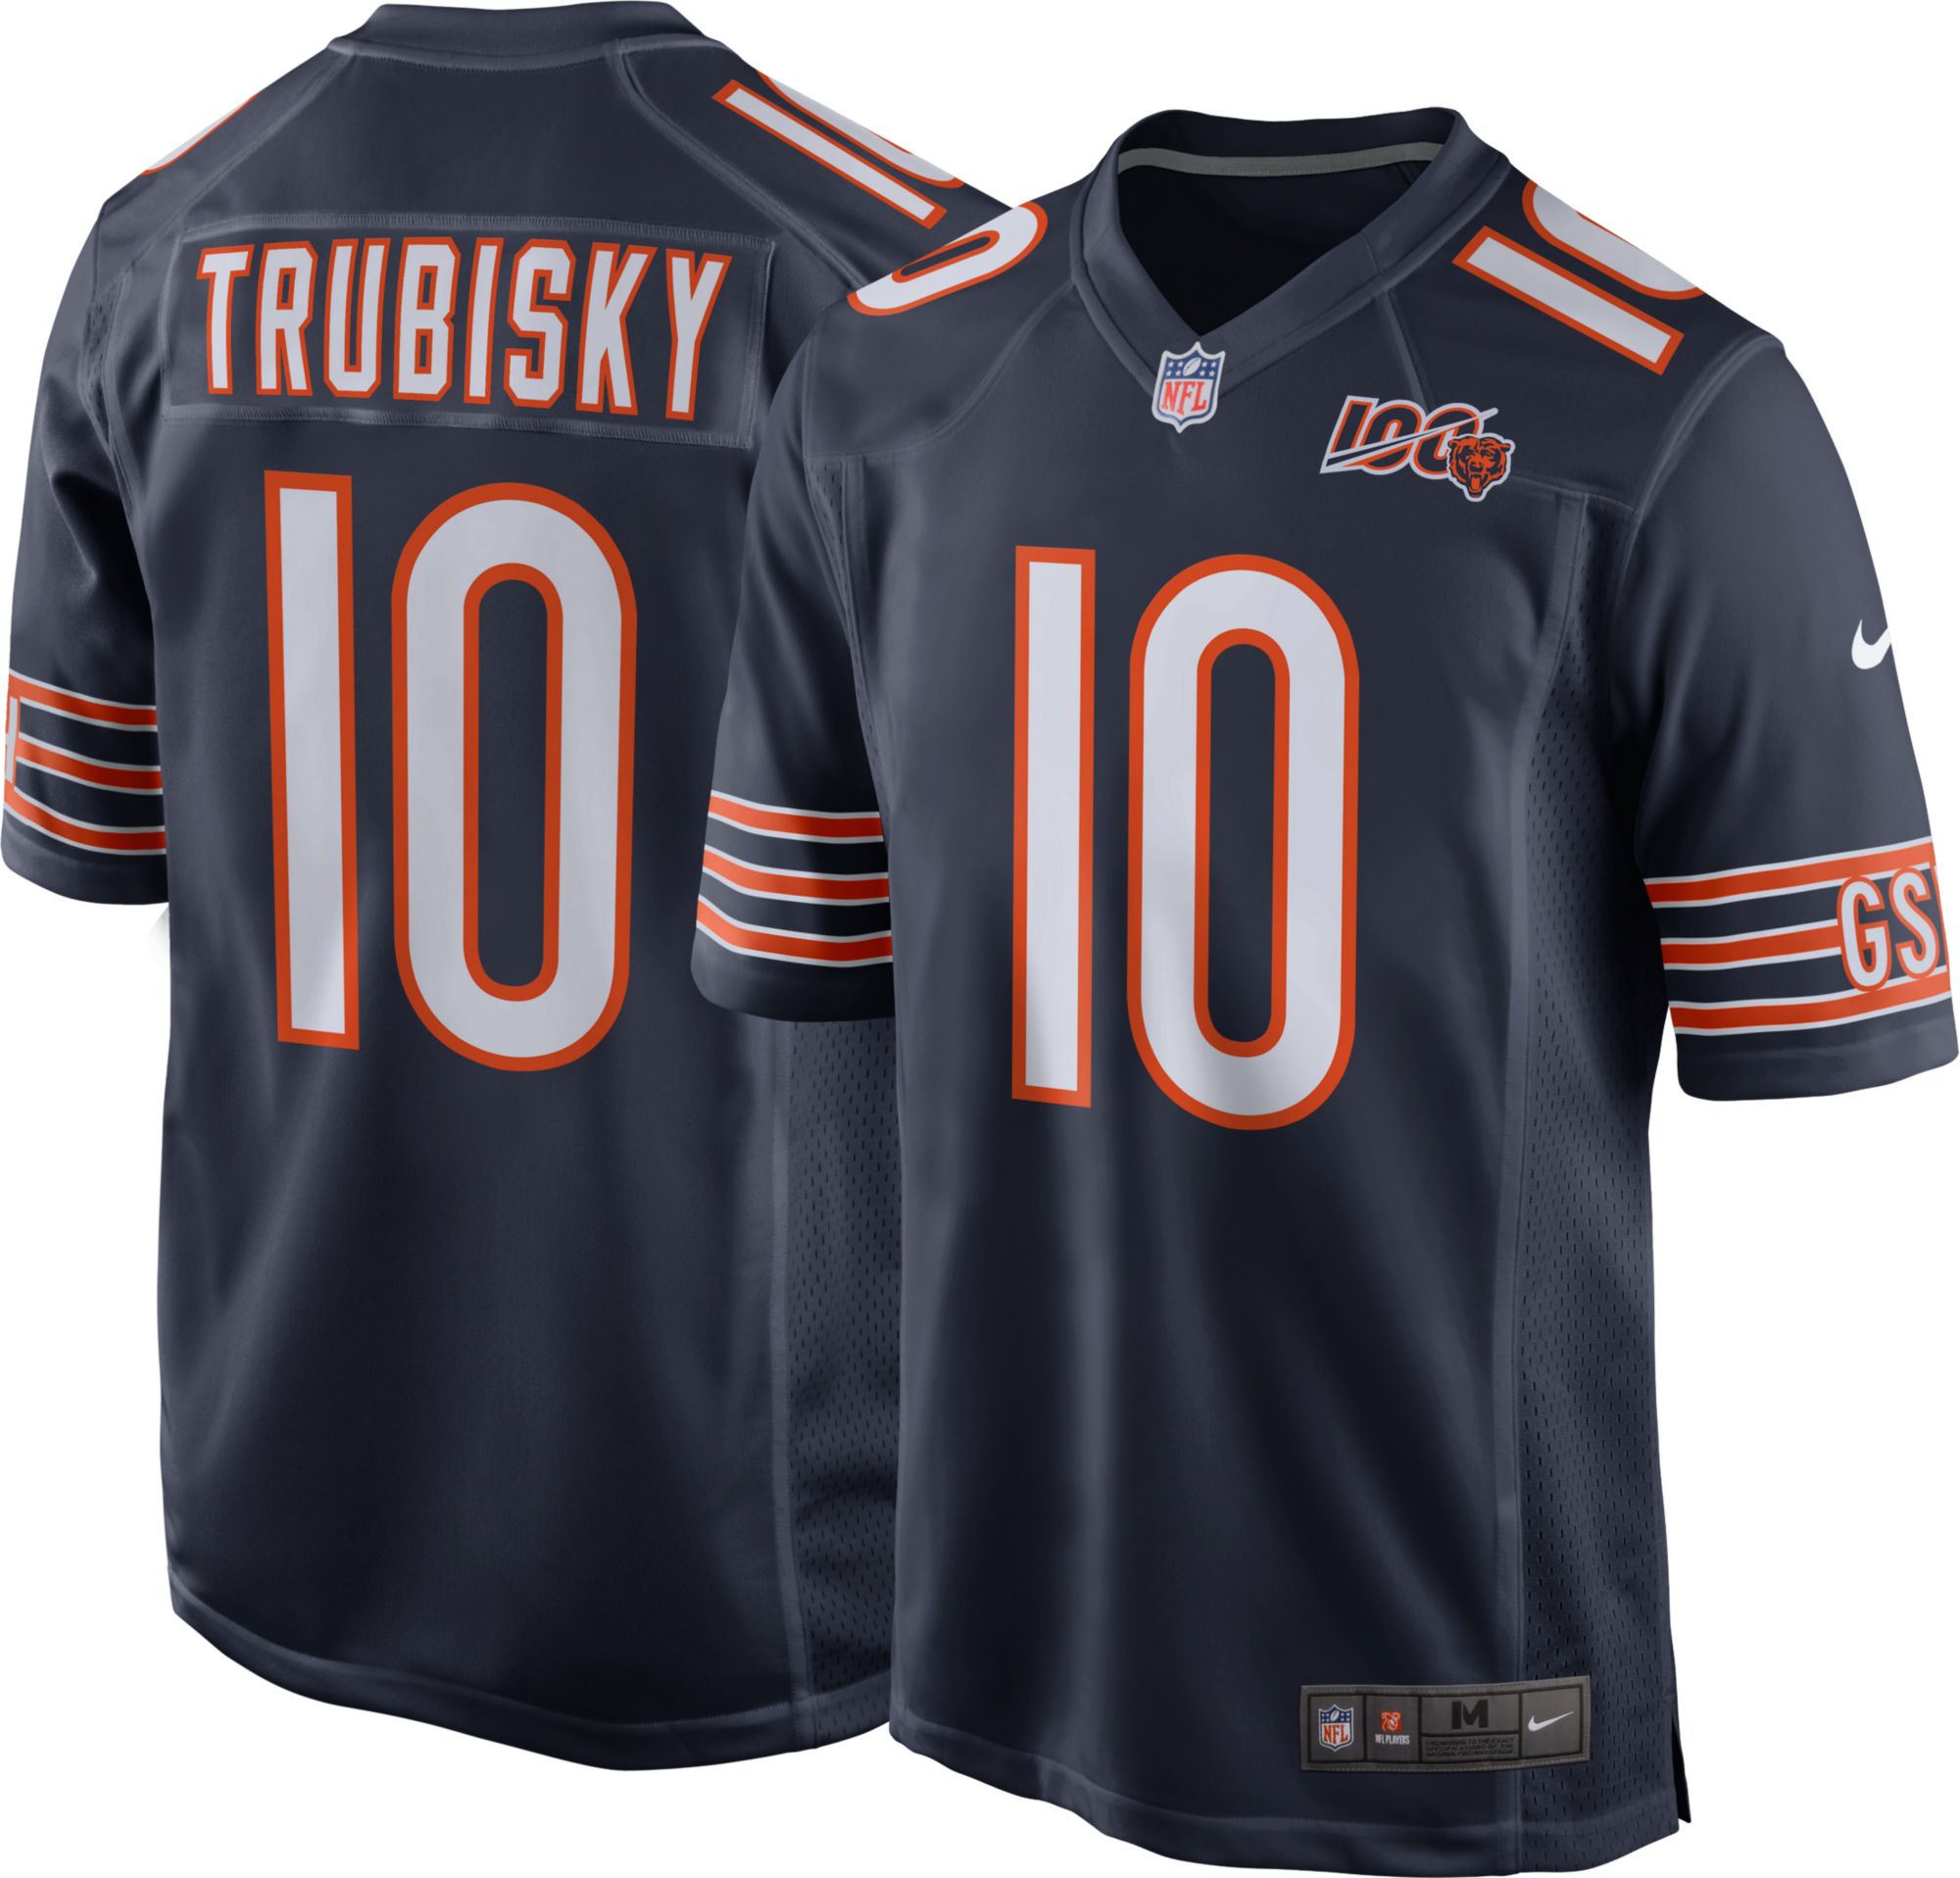 100 year nfl jersey